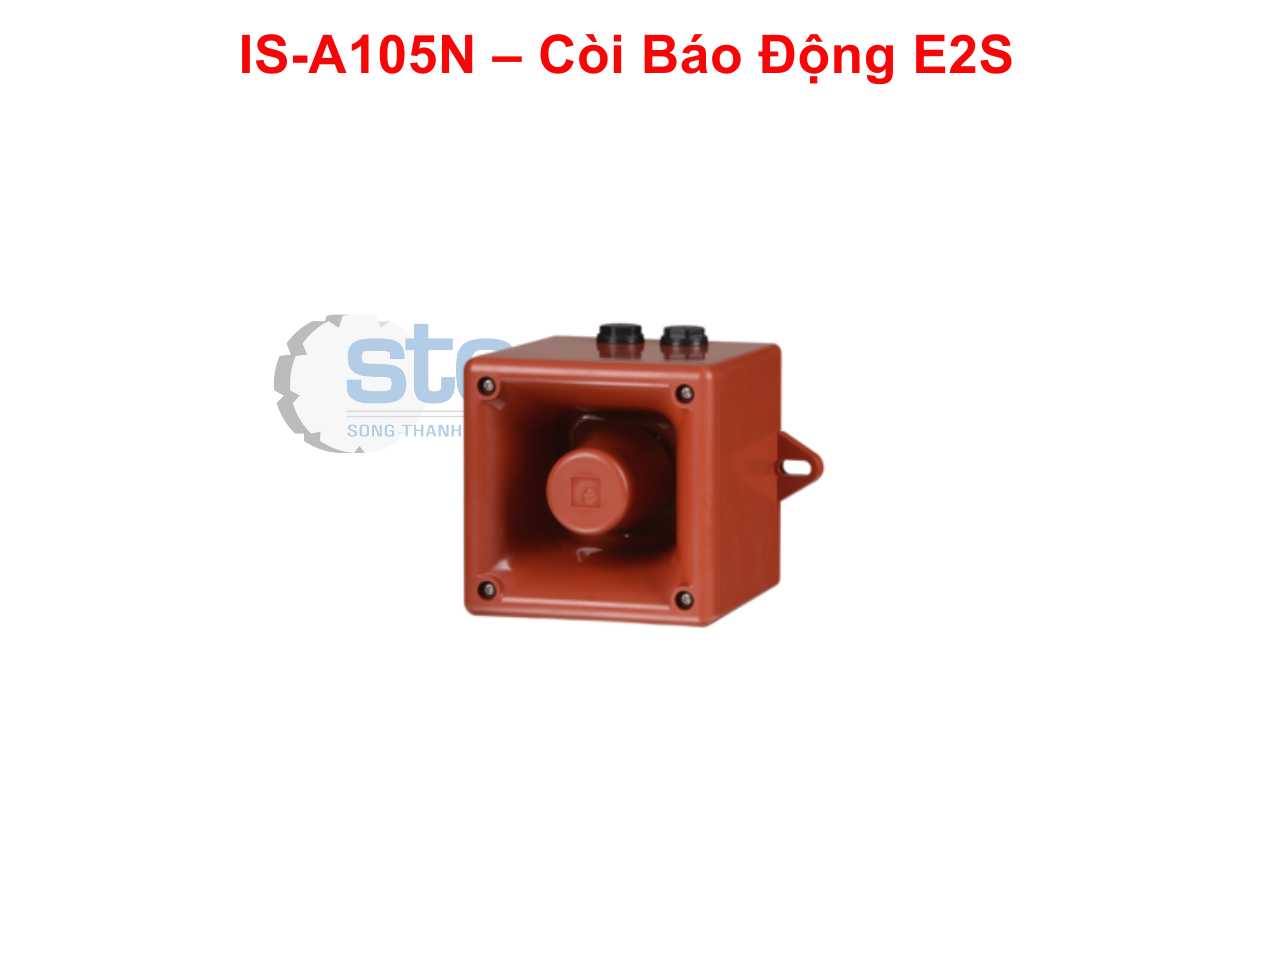 is-a105n-–-coi-bao-dong-e2s.png